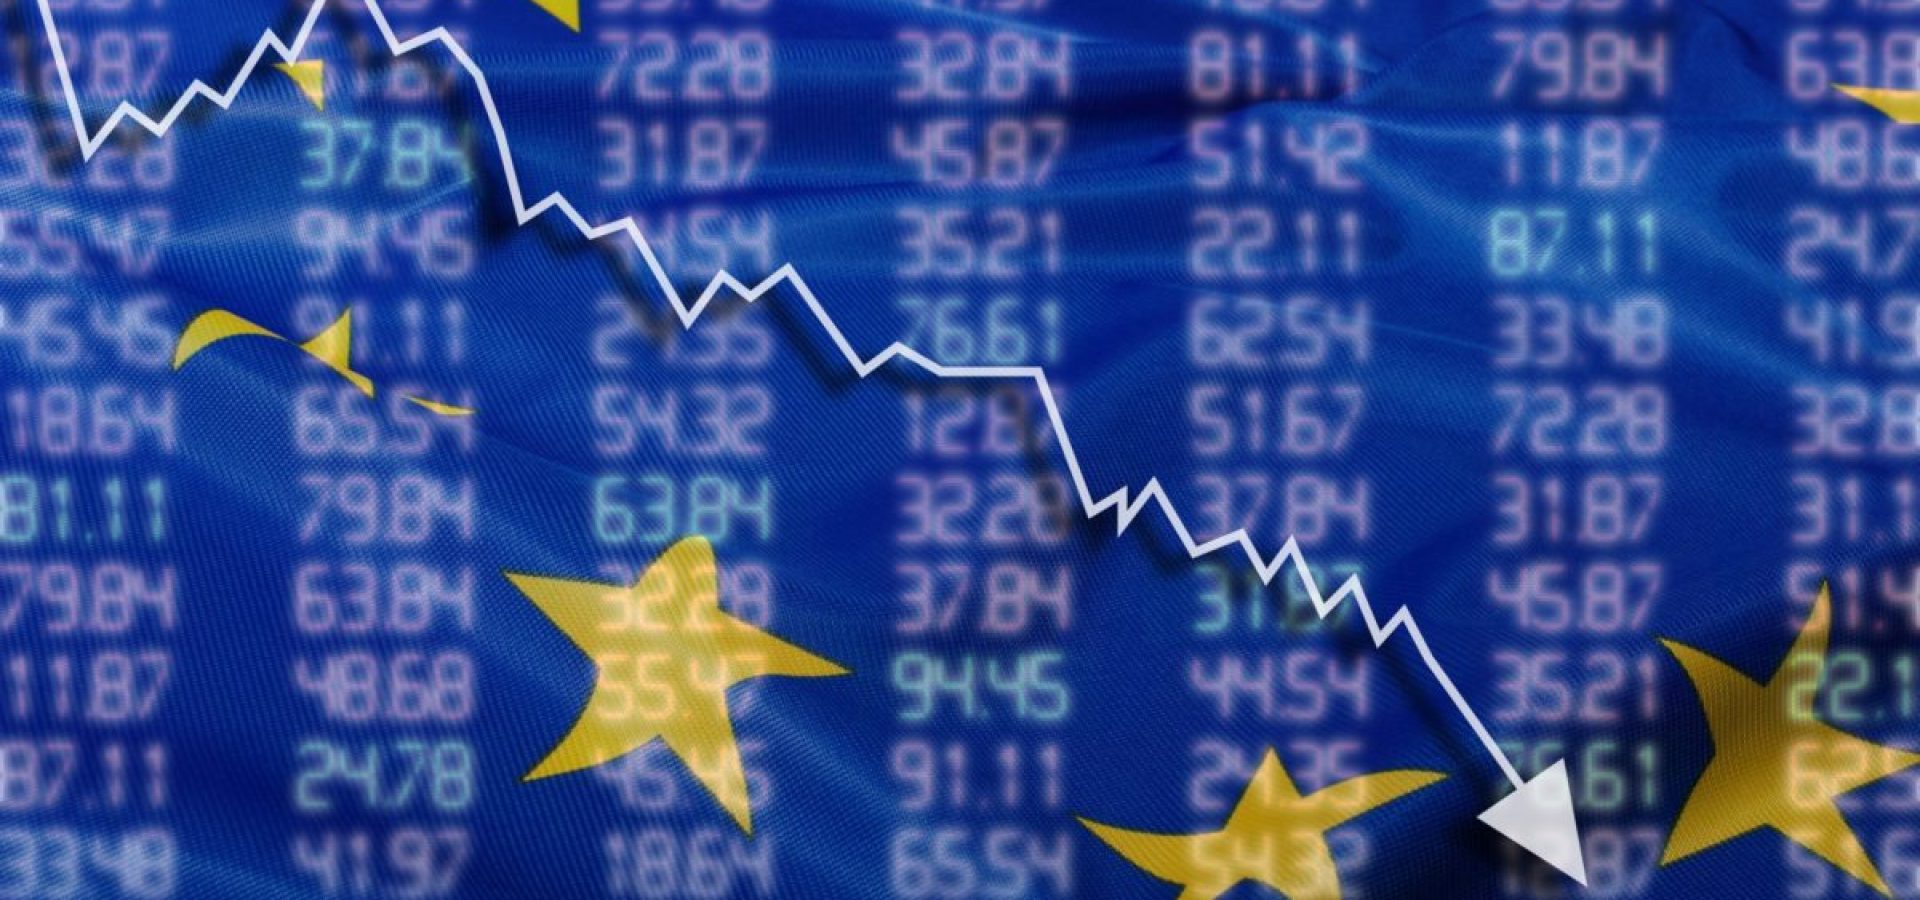 European stocks gain, helped by positive global sentiment